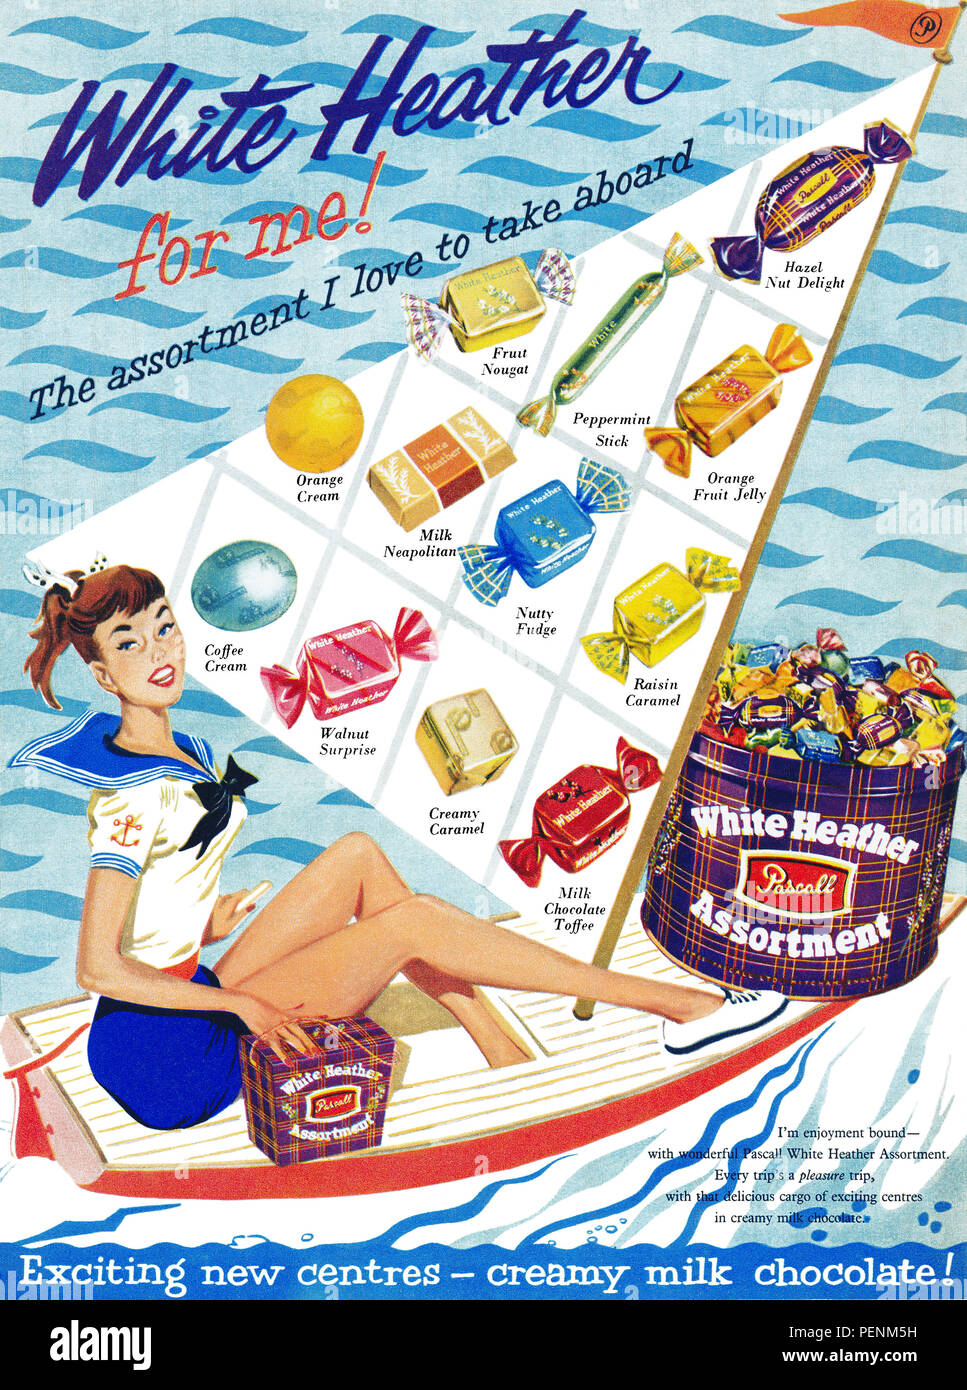 1957 British advertisement for Pascall's White Heather chocolate and toffee assortment, illustrated by Aubrey Rix. Stock Photo